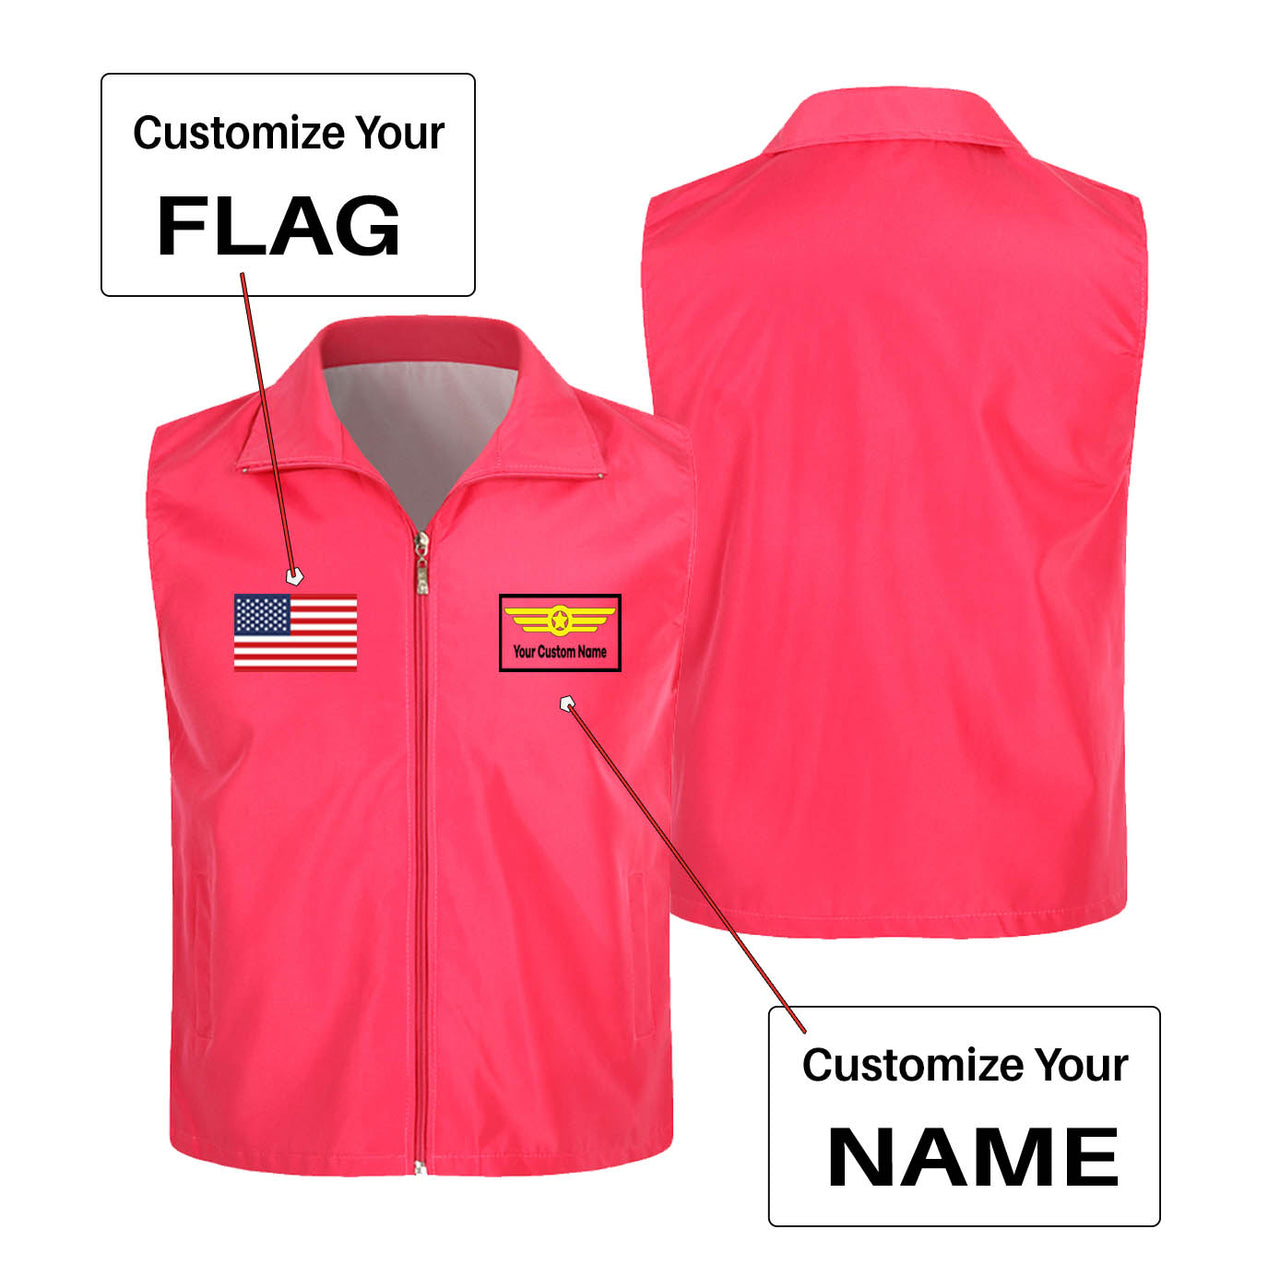 Custom Flag & Name with "Badge 1" Designed Thin Style Vests